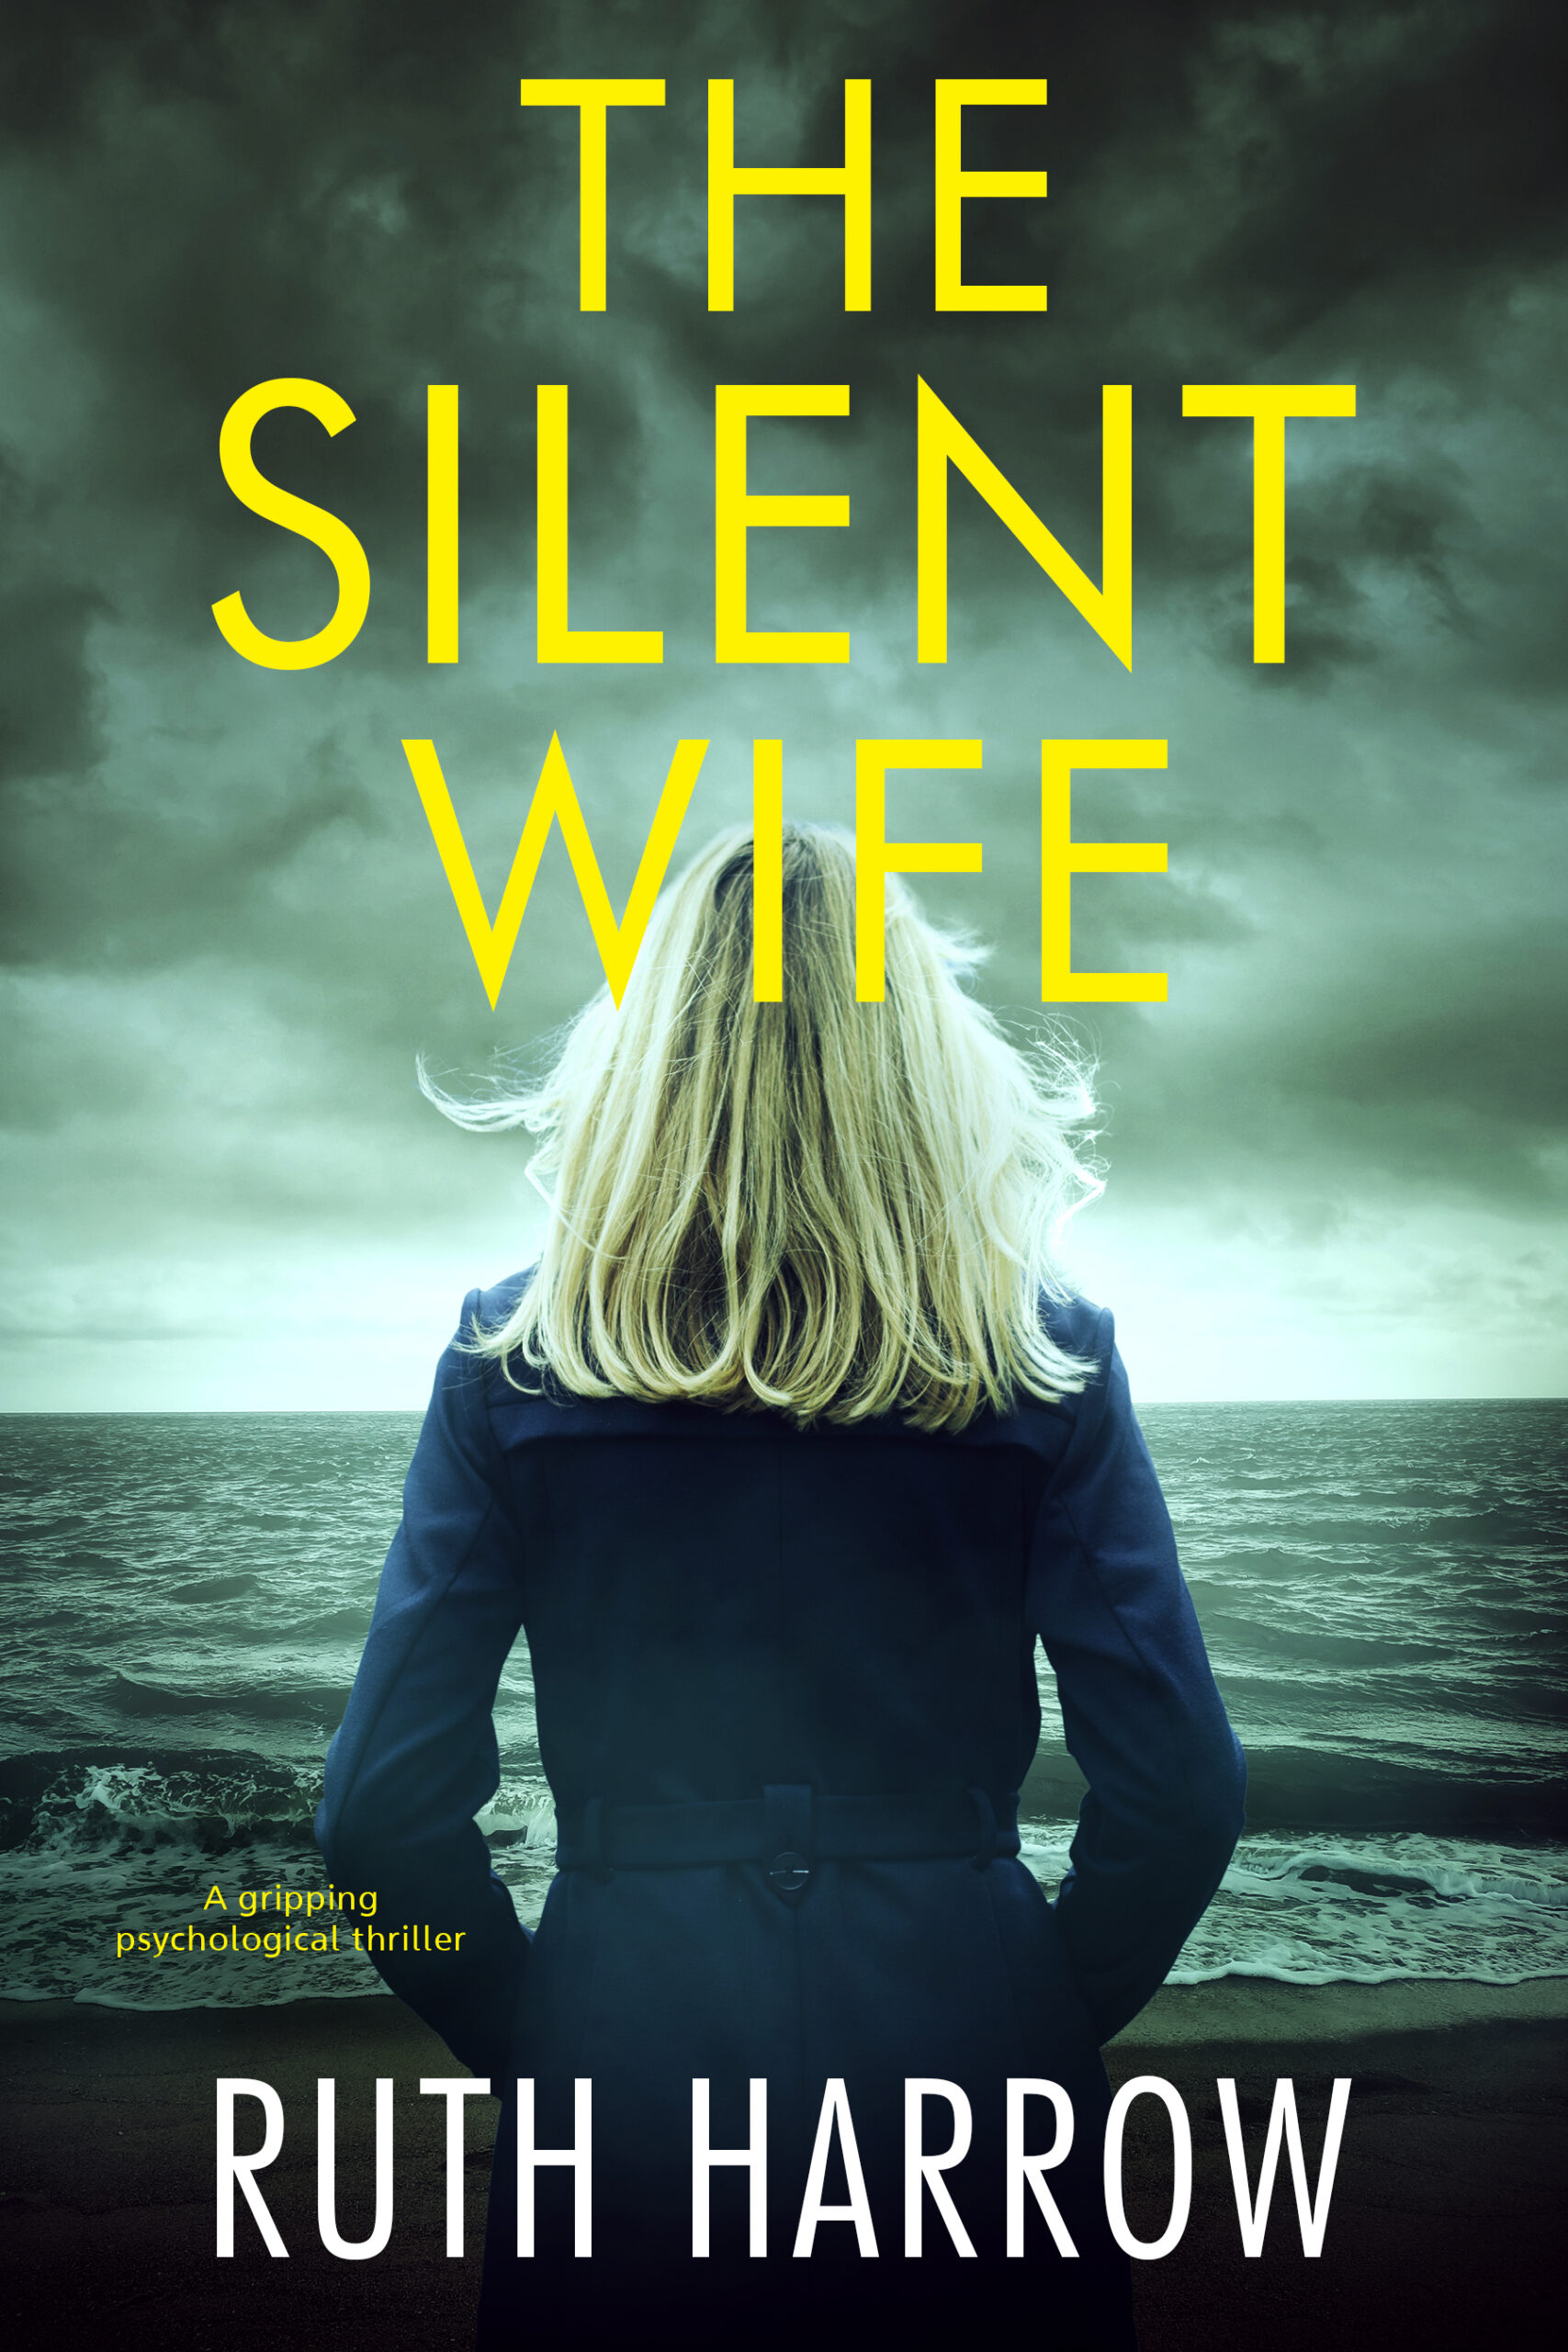 RUTH HARROW NEW RELEASE – THE SILENT WIFE